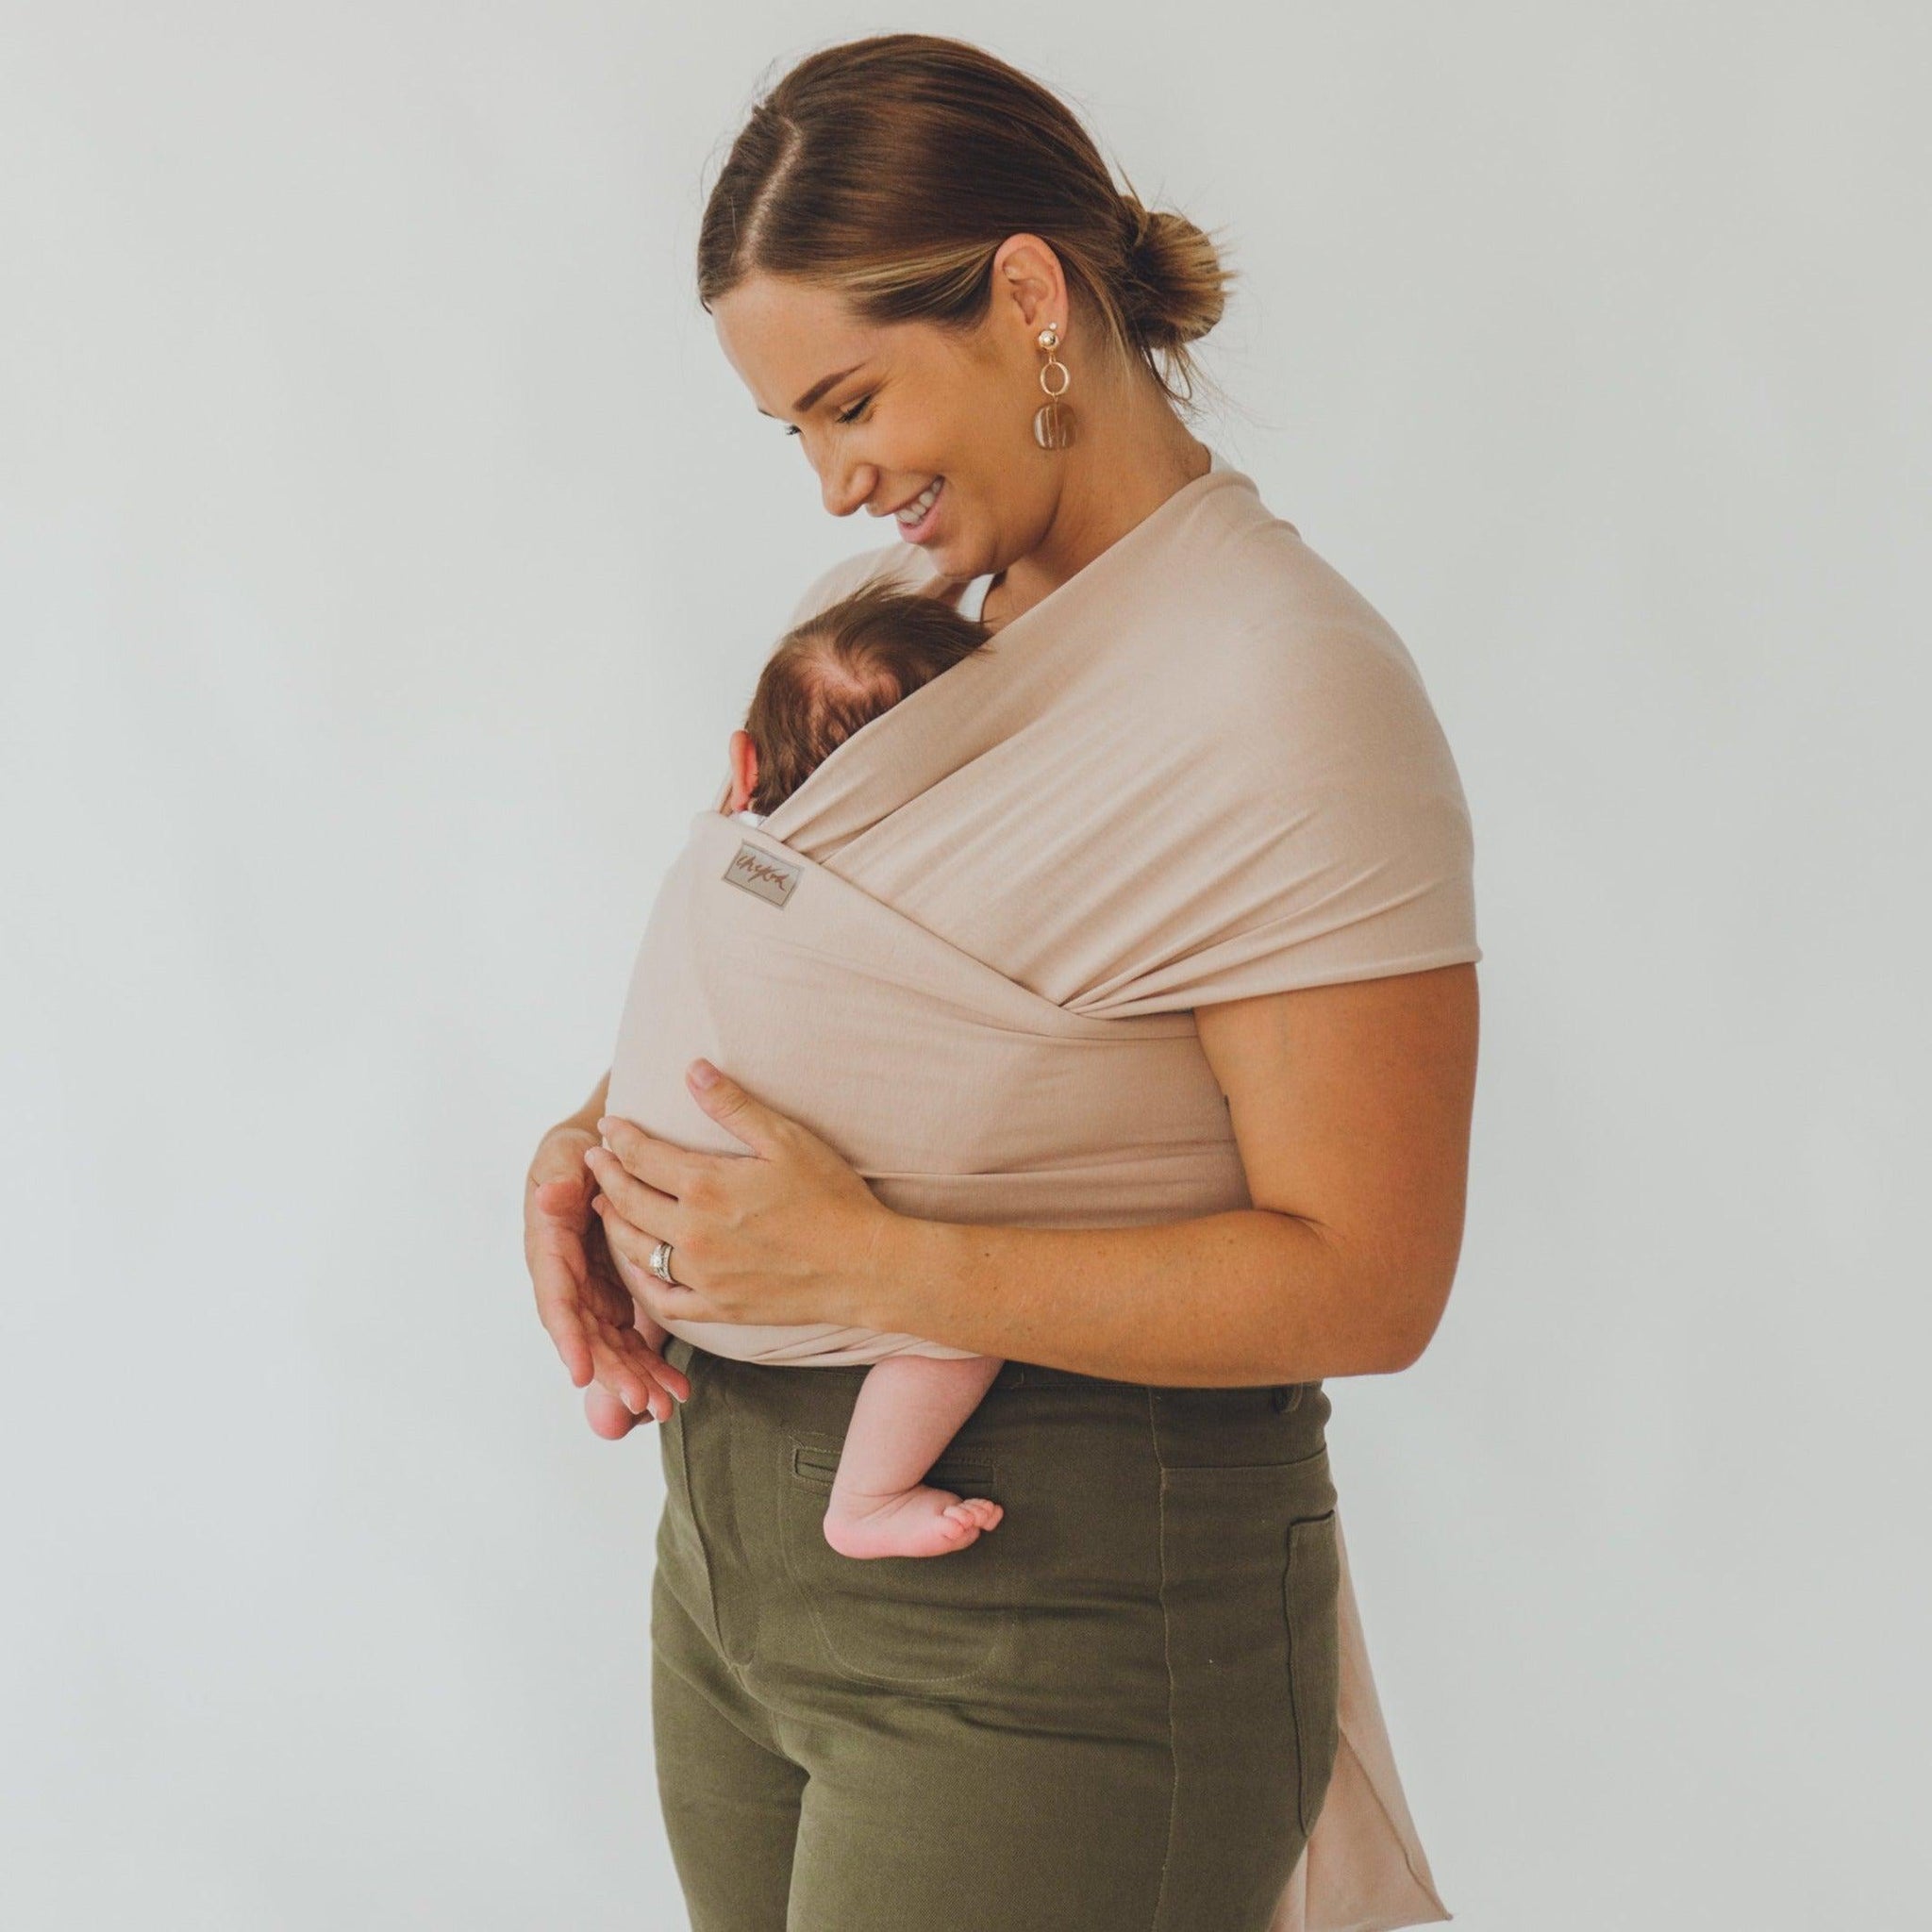 The Cinta Wrap is a gorgeous blush beige, perfect to compliment any look or style. Made from our exclusive, in house bamboo/spandex fabric blends.Completely adjustable for comfortable fit for any size - exclusive fabric will mould perfectly to the contours of your body & your baby.